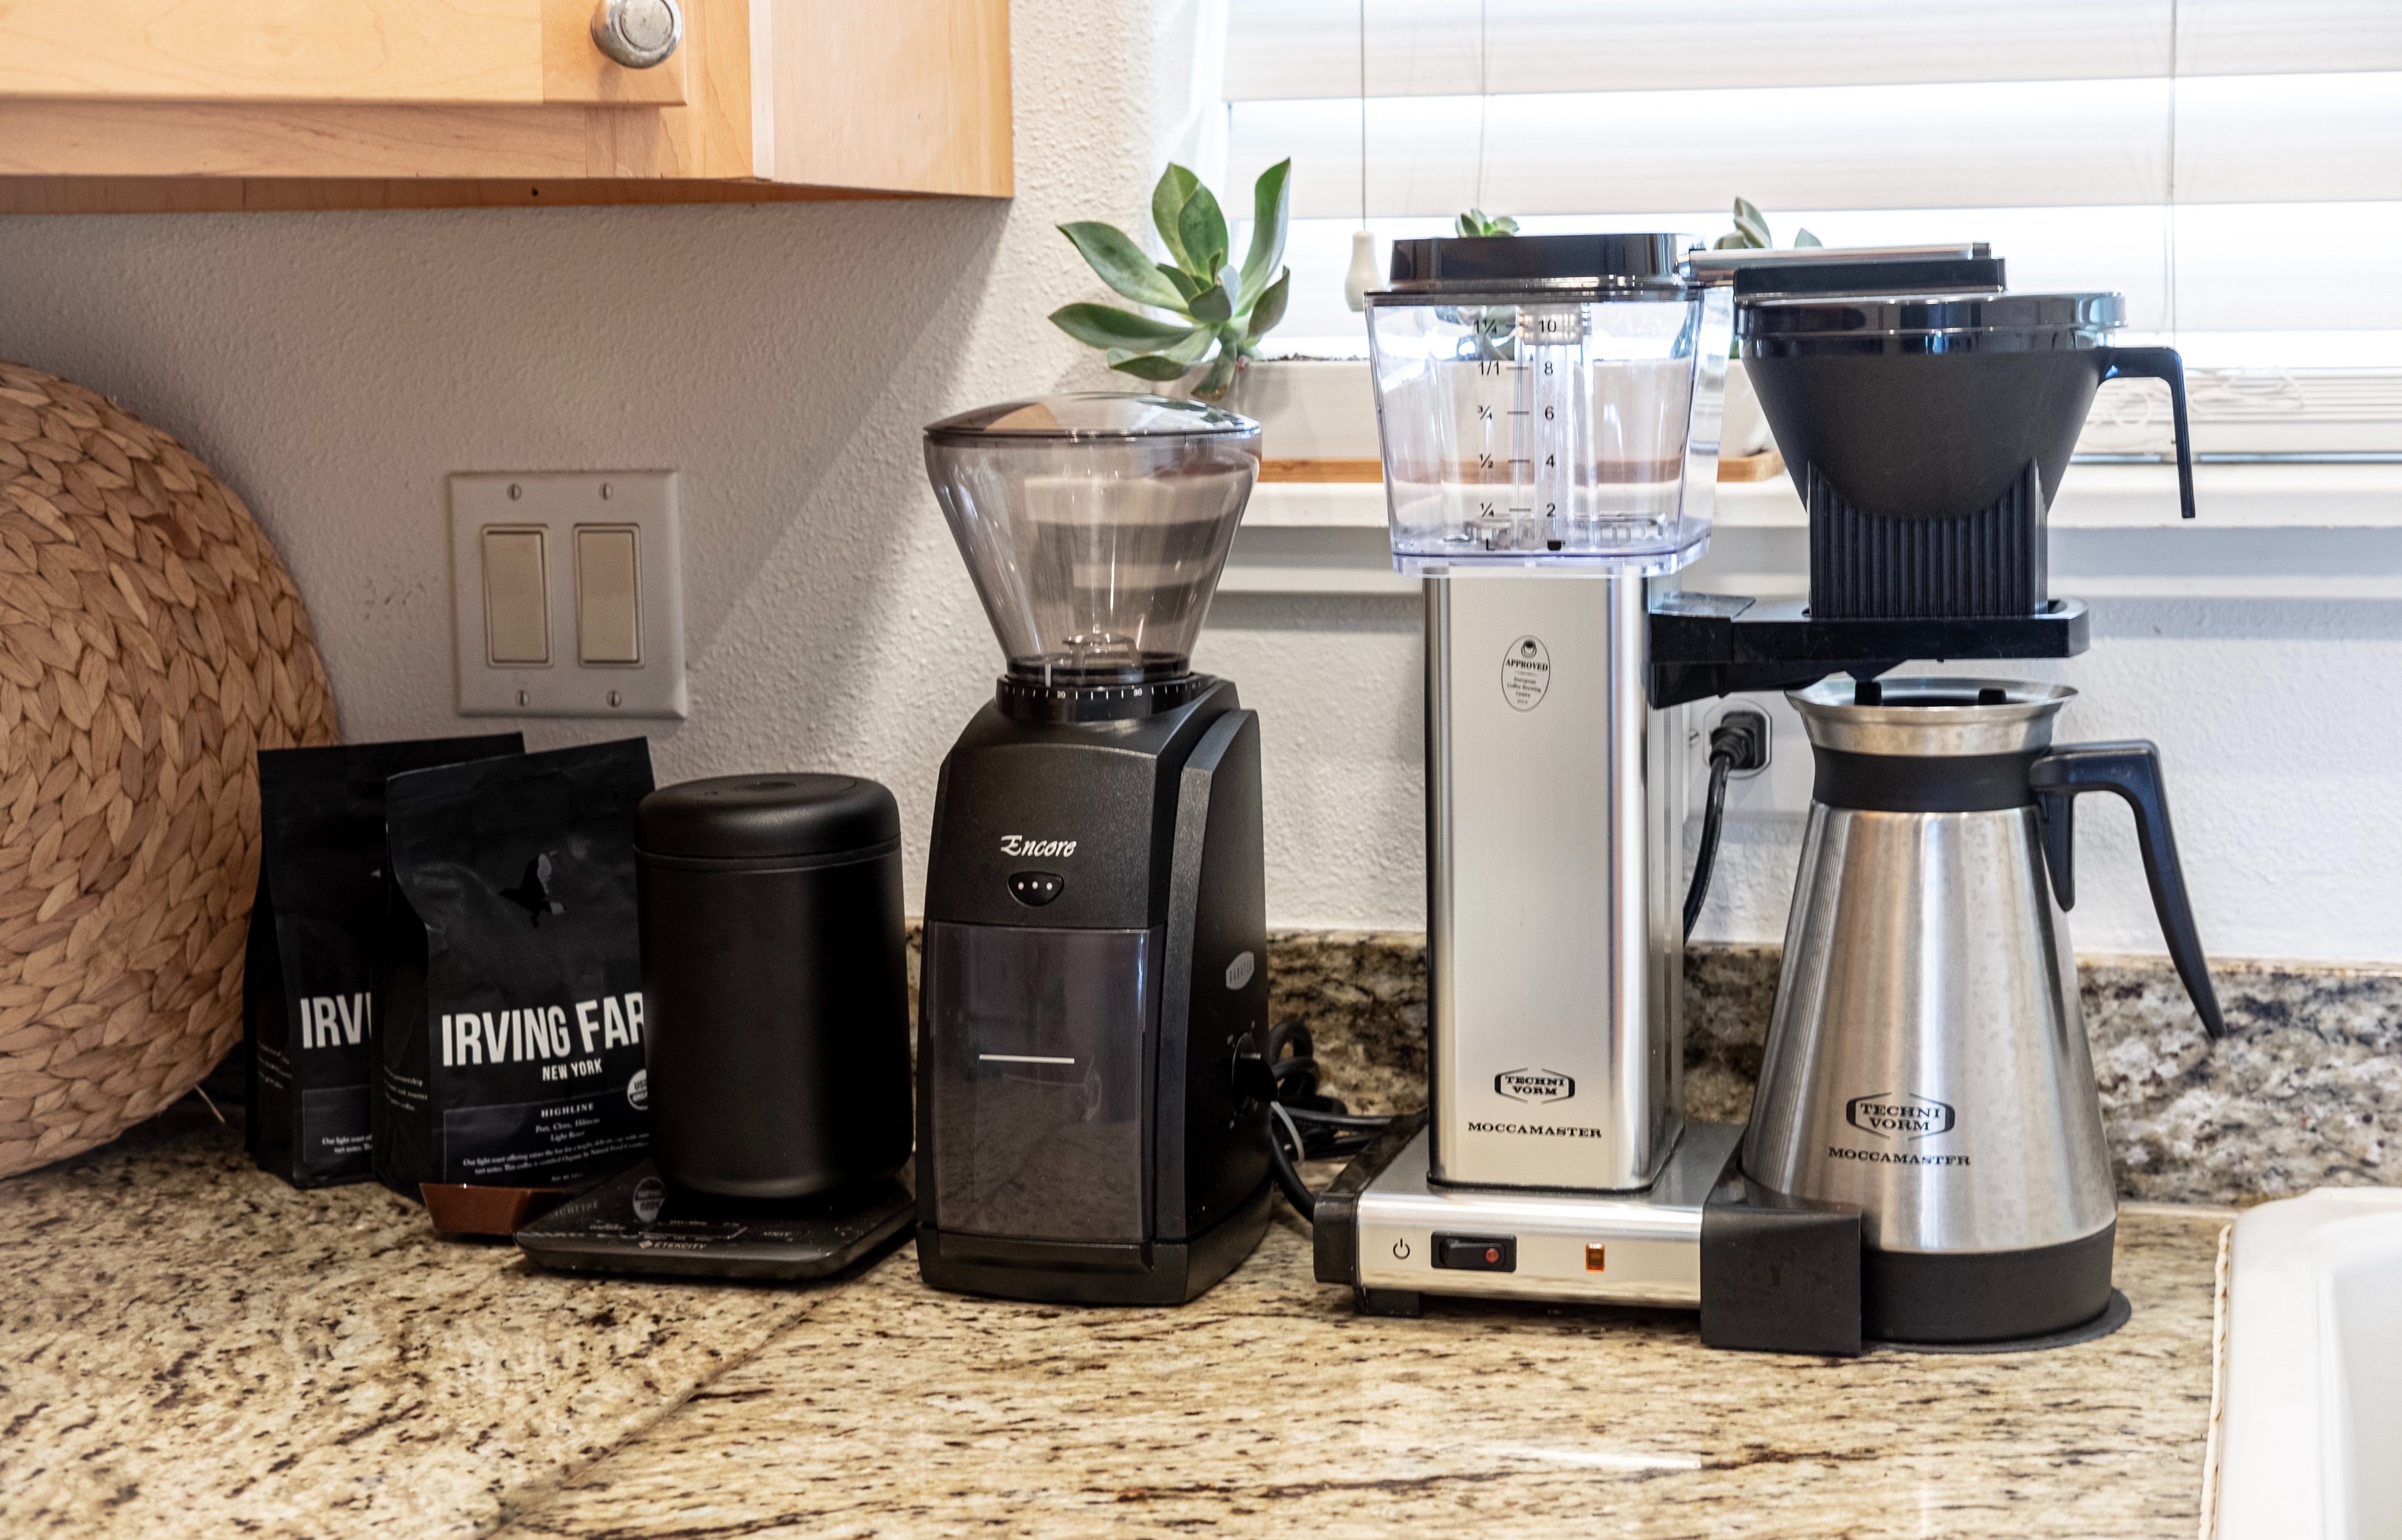 A coffee machine and other appliances sit on a kitchen counter.